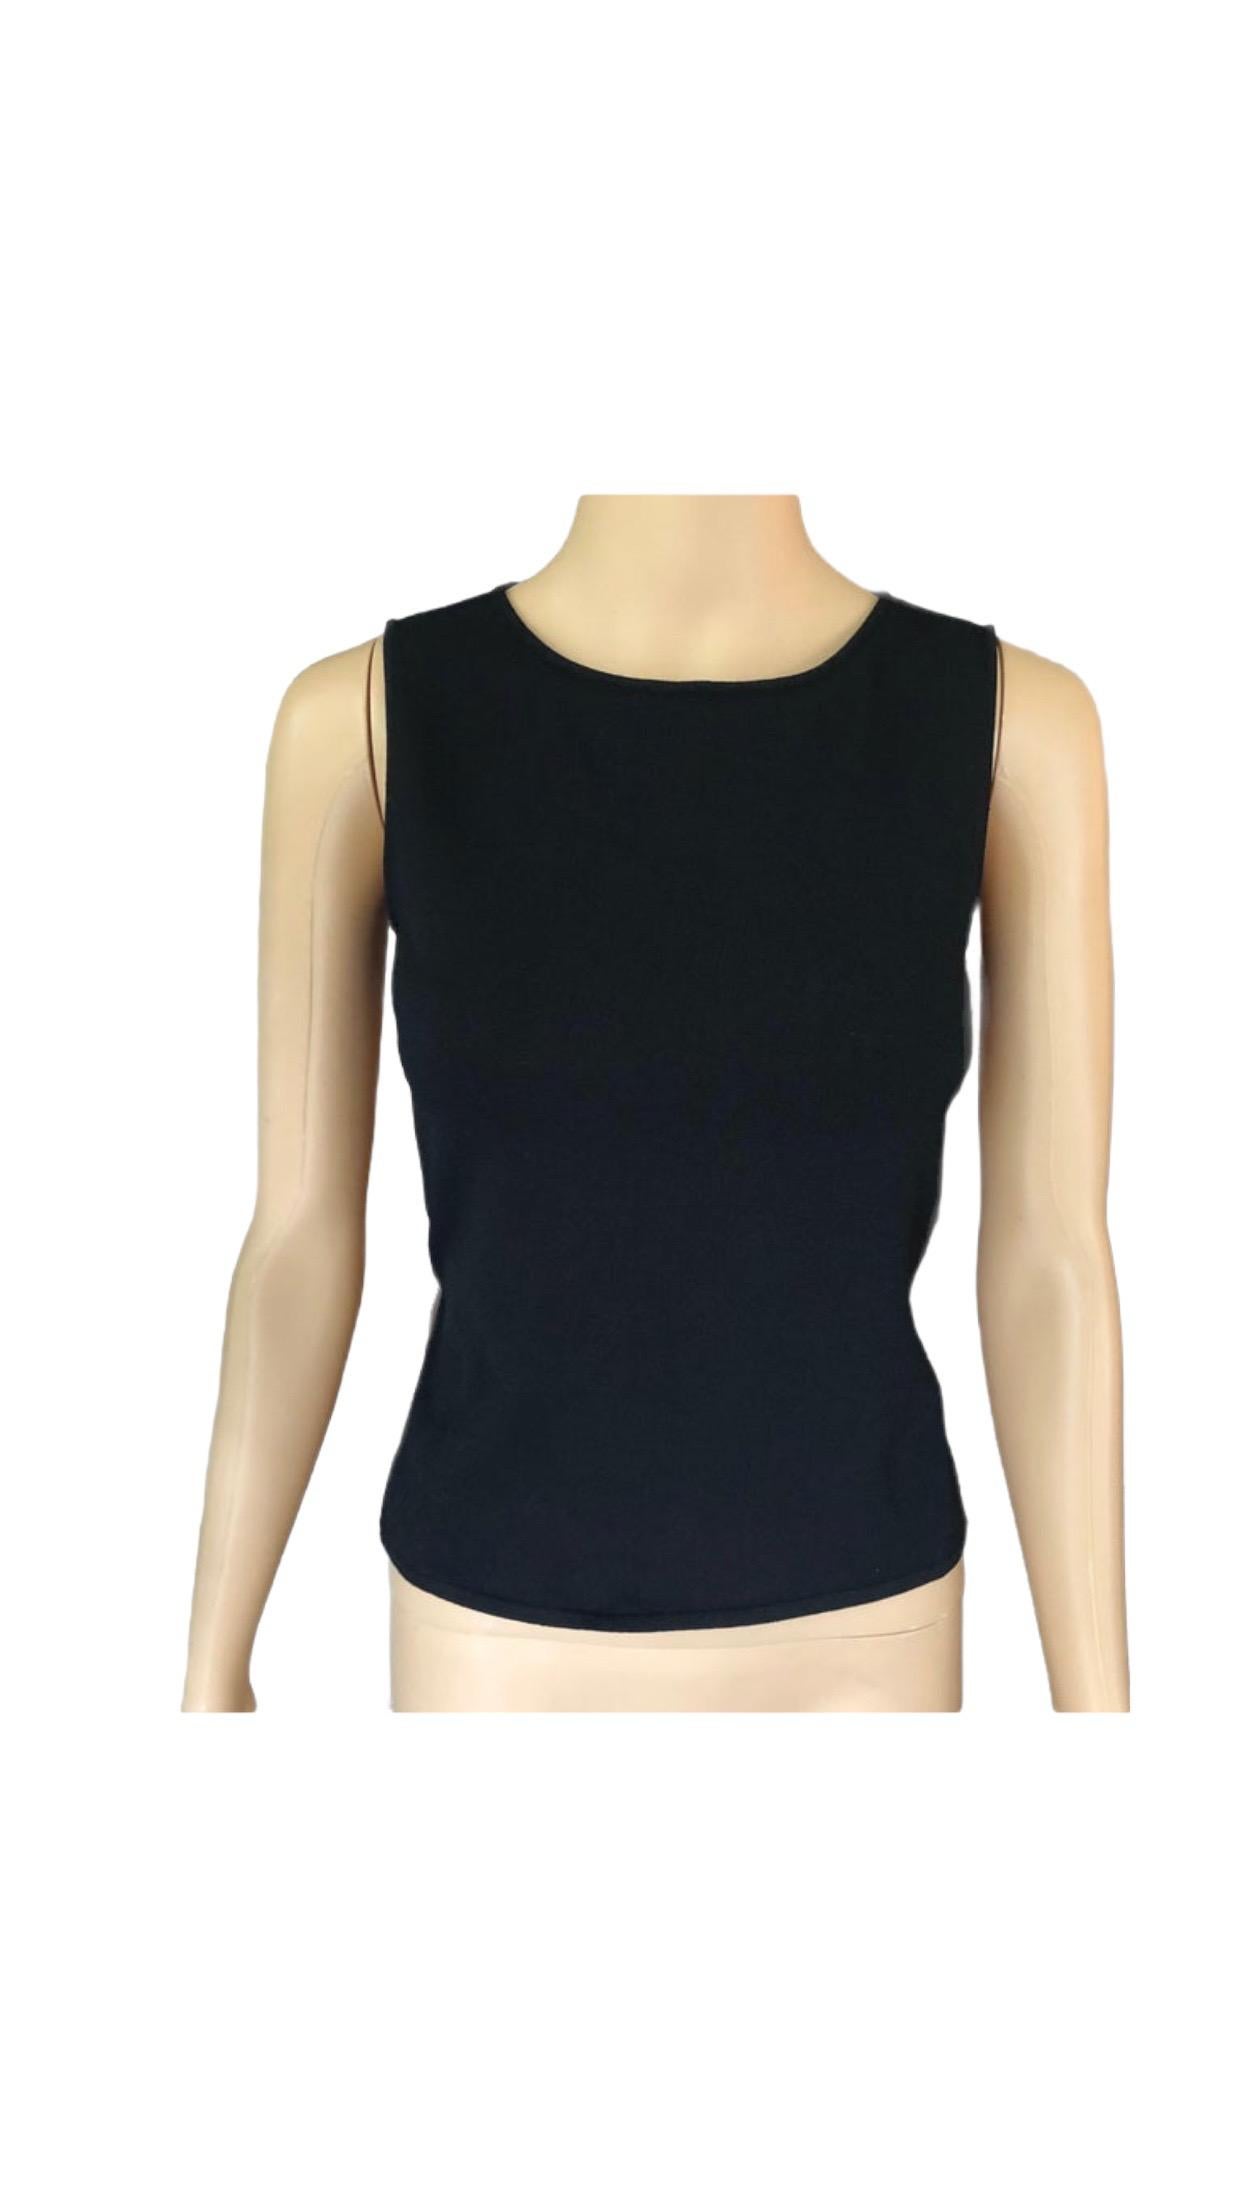 Gucci by Tom Ford c.1999 Knit Backless Strappy Logo Buckle Black Crop Top In Excellent Condition For Sale In Naples, FL